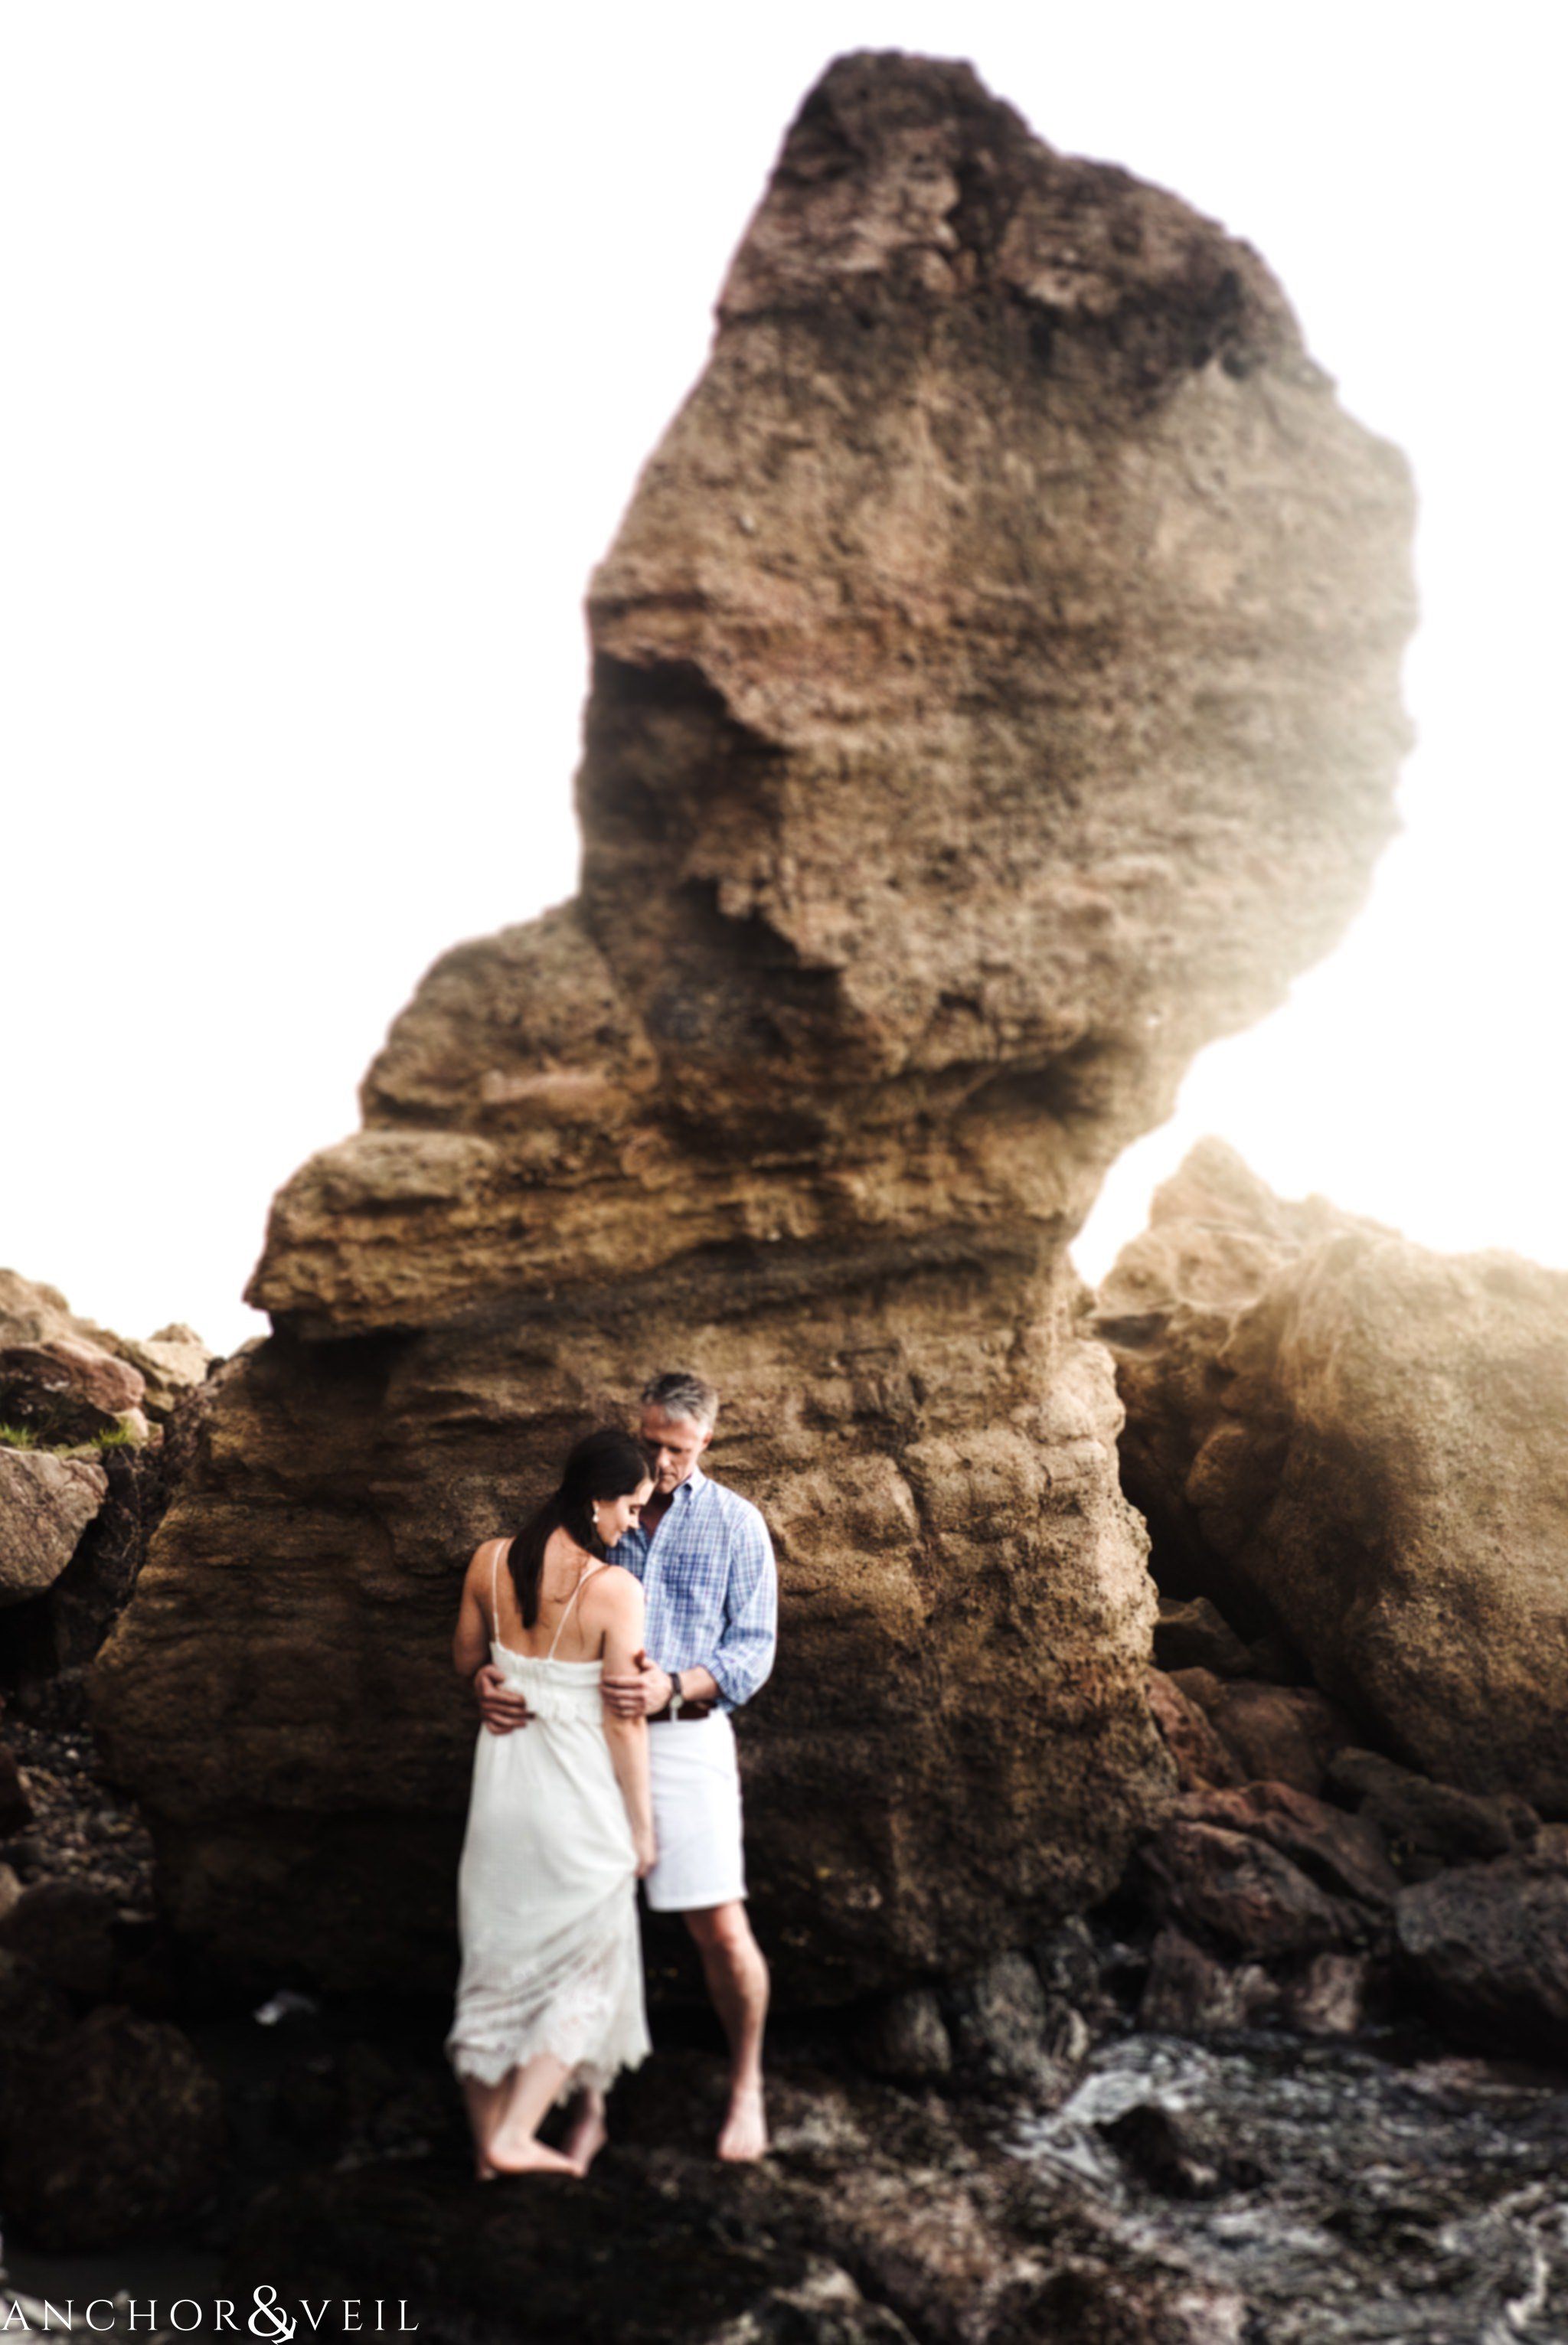 Standing on front of the large rock as they kiss and hold each other